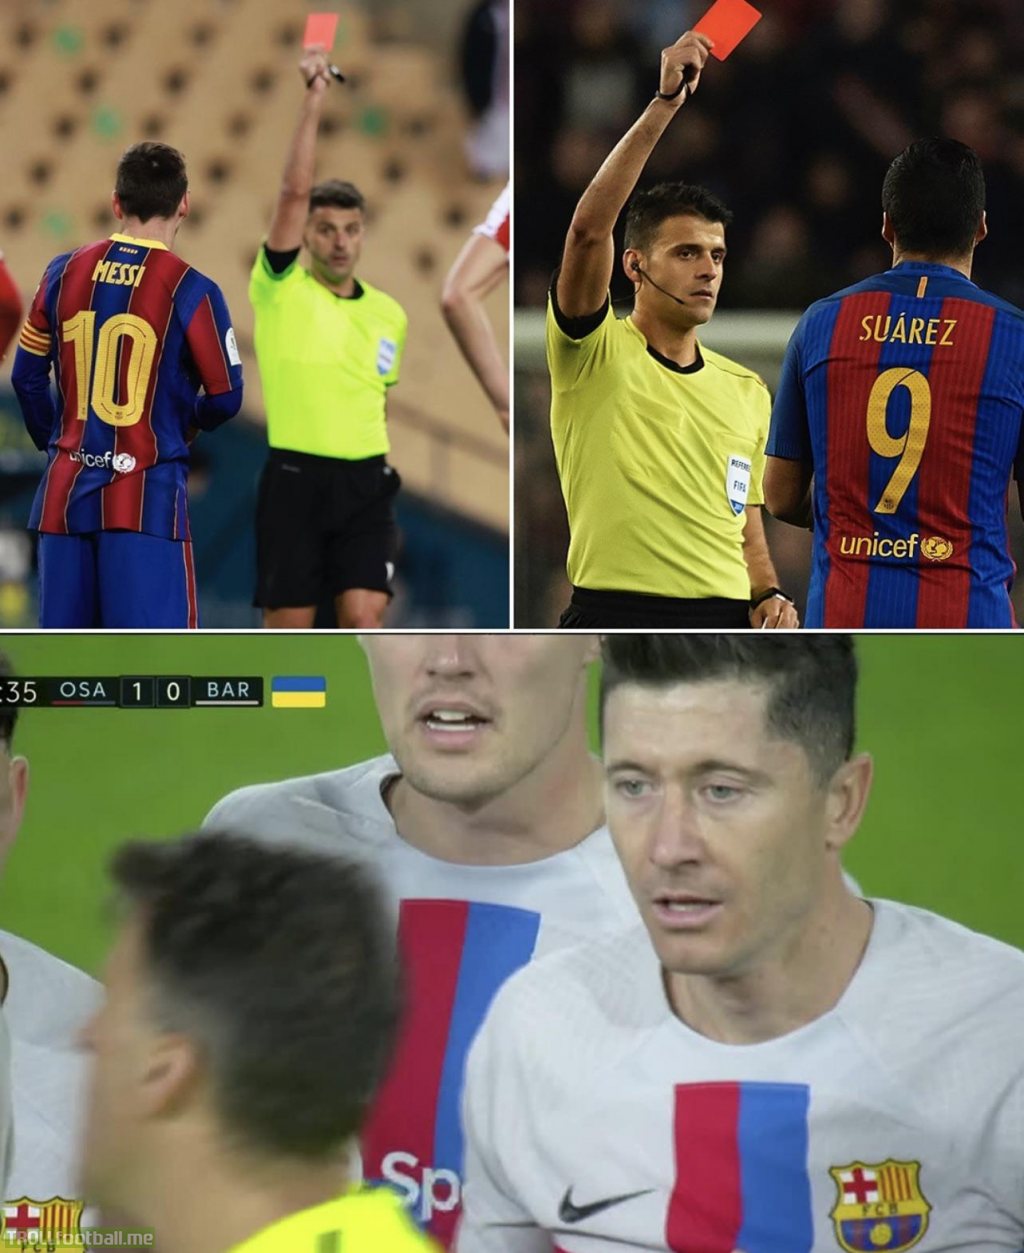 Referee Jesus Gil Manzano has issued red cards to Messi, Suarez and Lewandowski in his career.